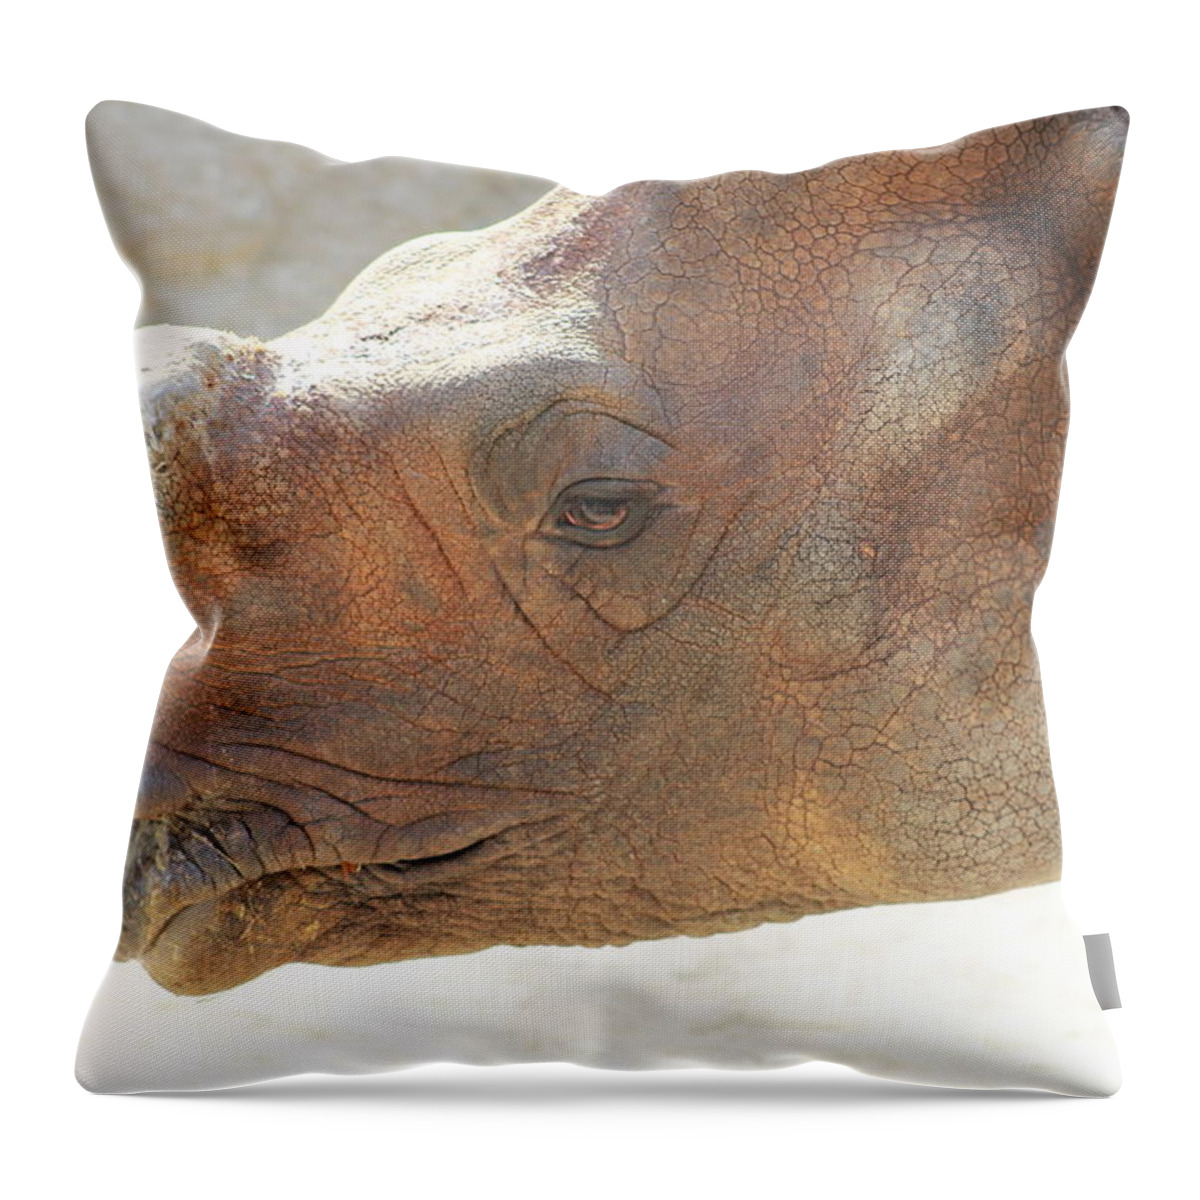 Rhino Throw Pillow featuring the photograph Rhino by Stacy Mcwhorter